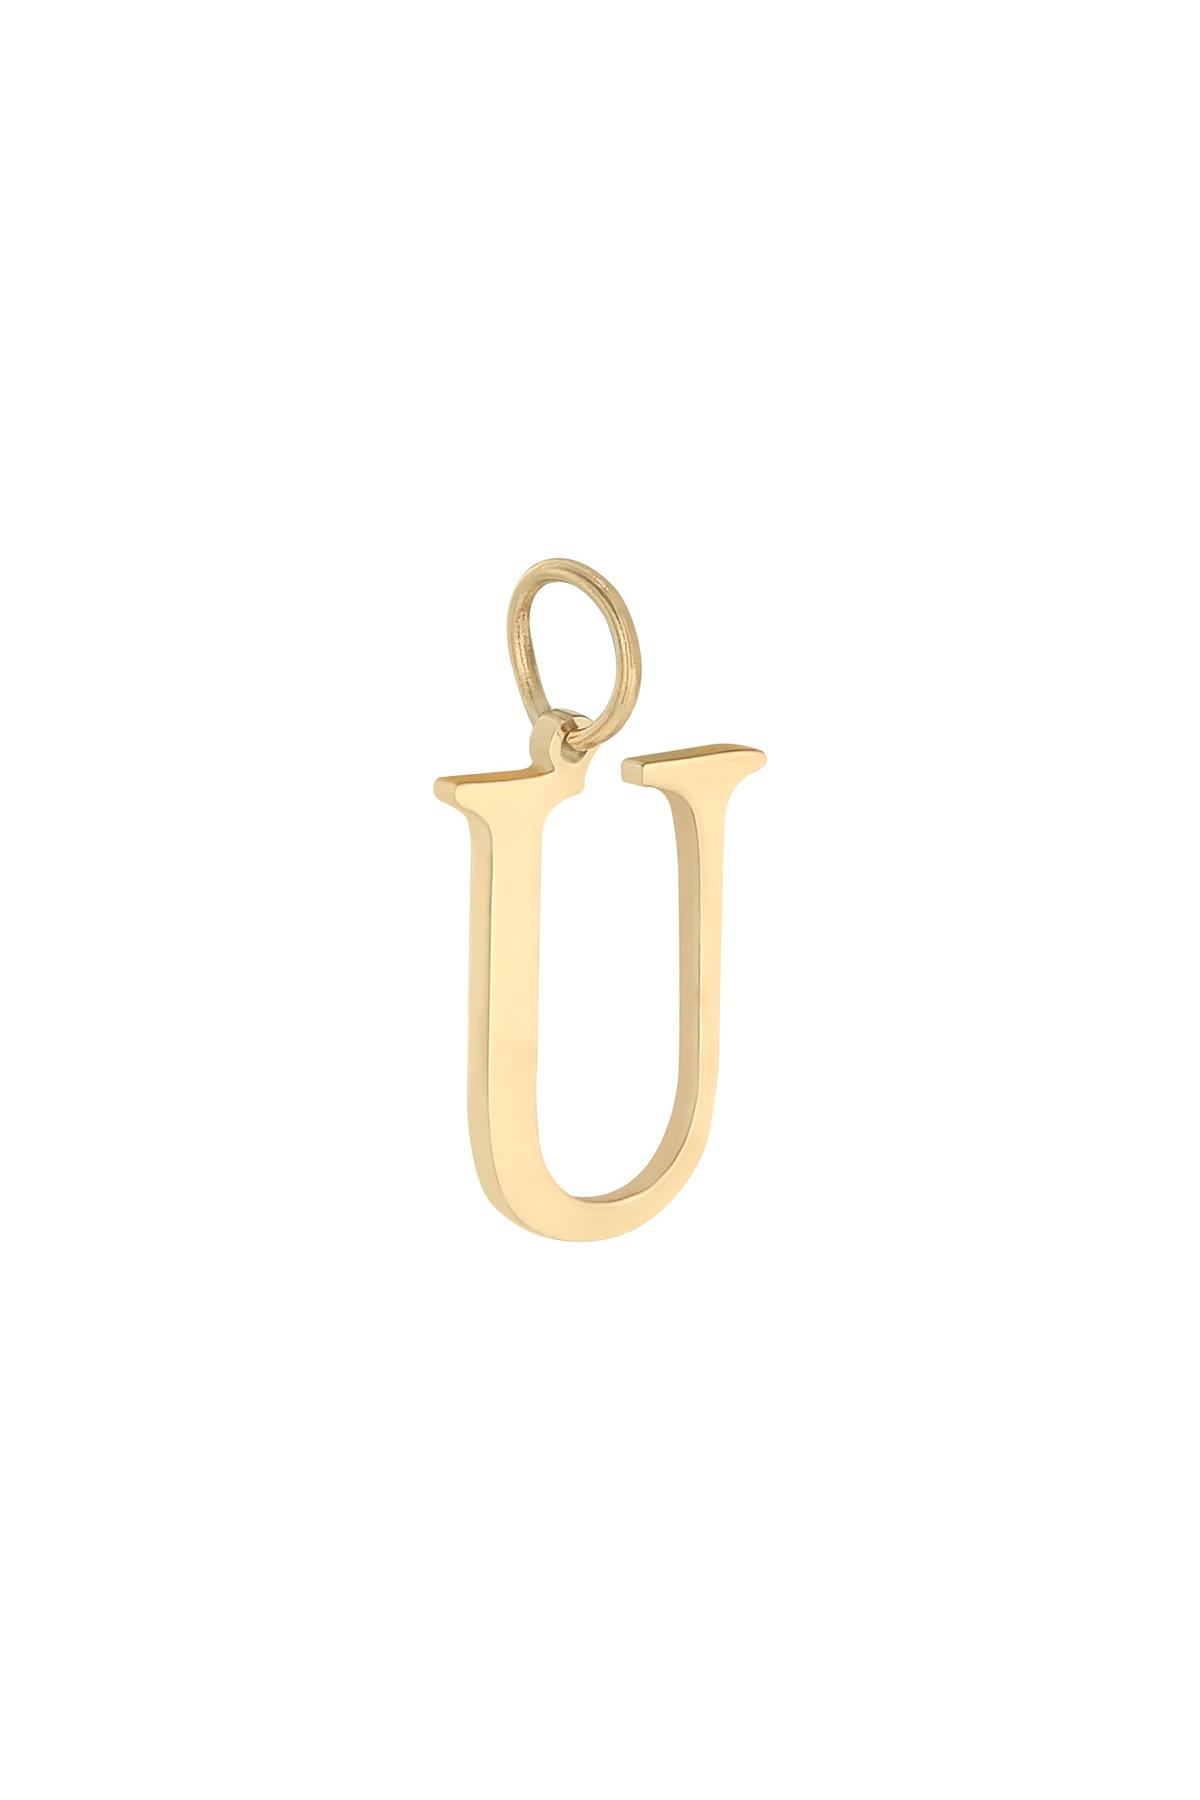 Gold / Charm U Gold Stainless Steel Picture26